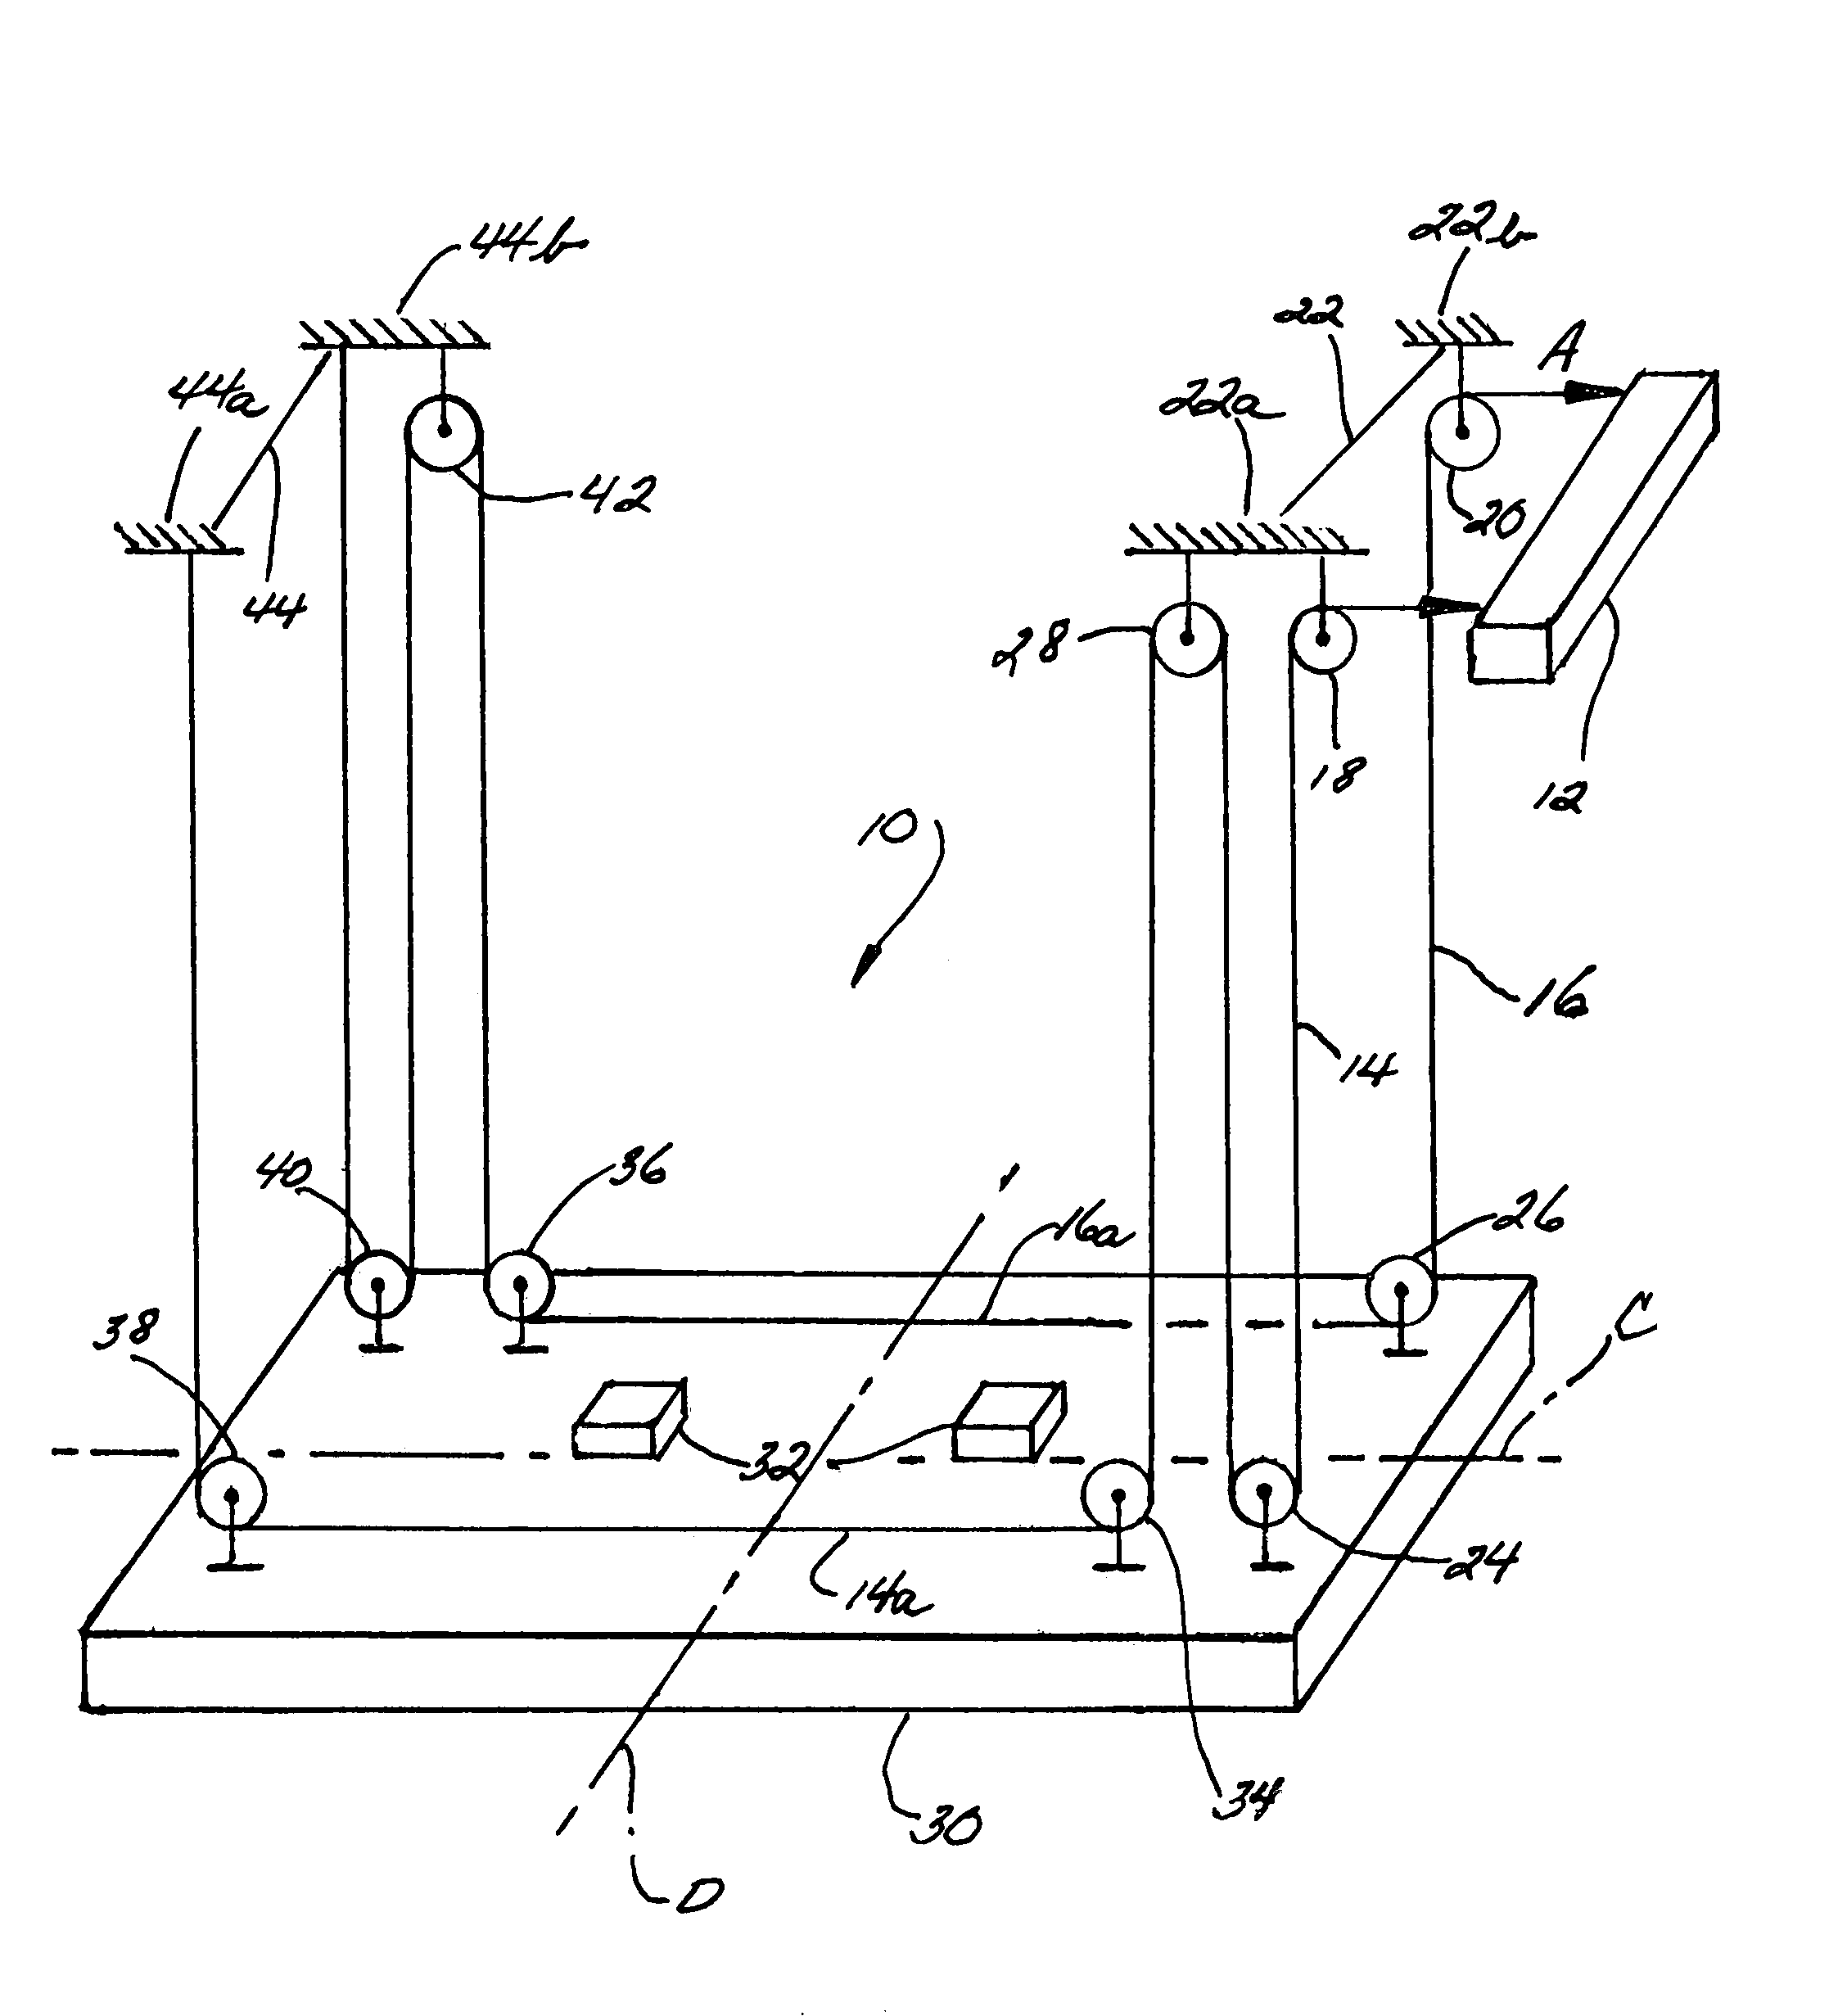 Self-stabilizing suspension and hoisting system